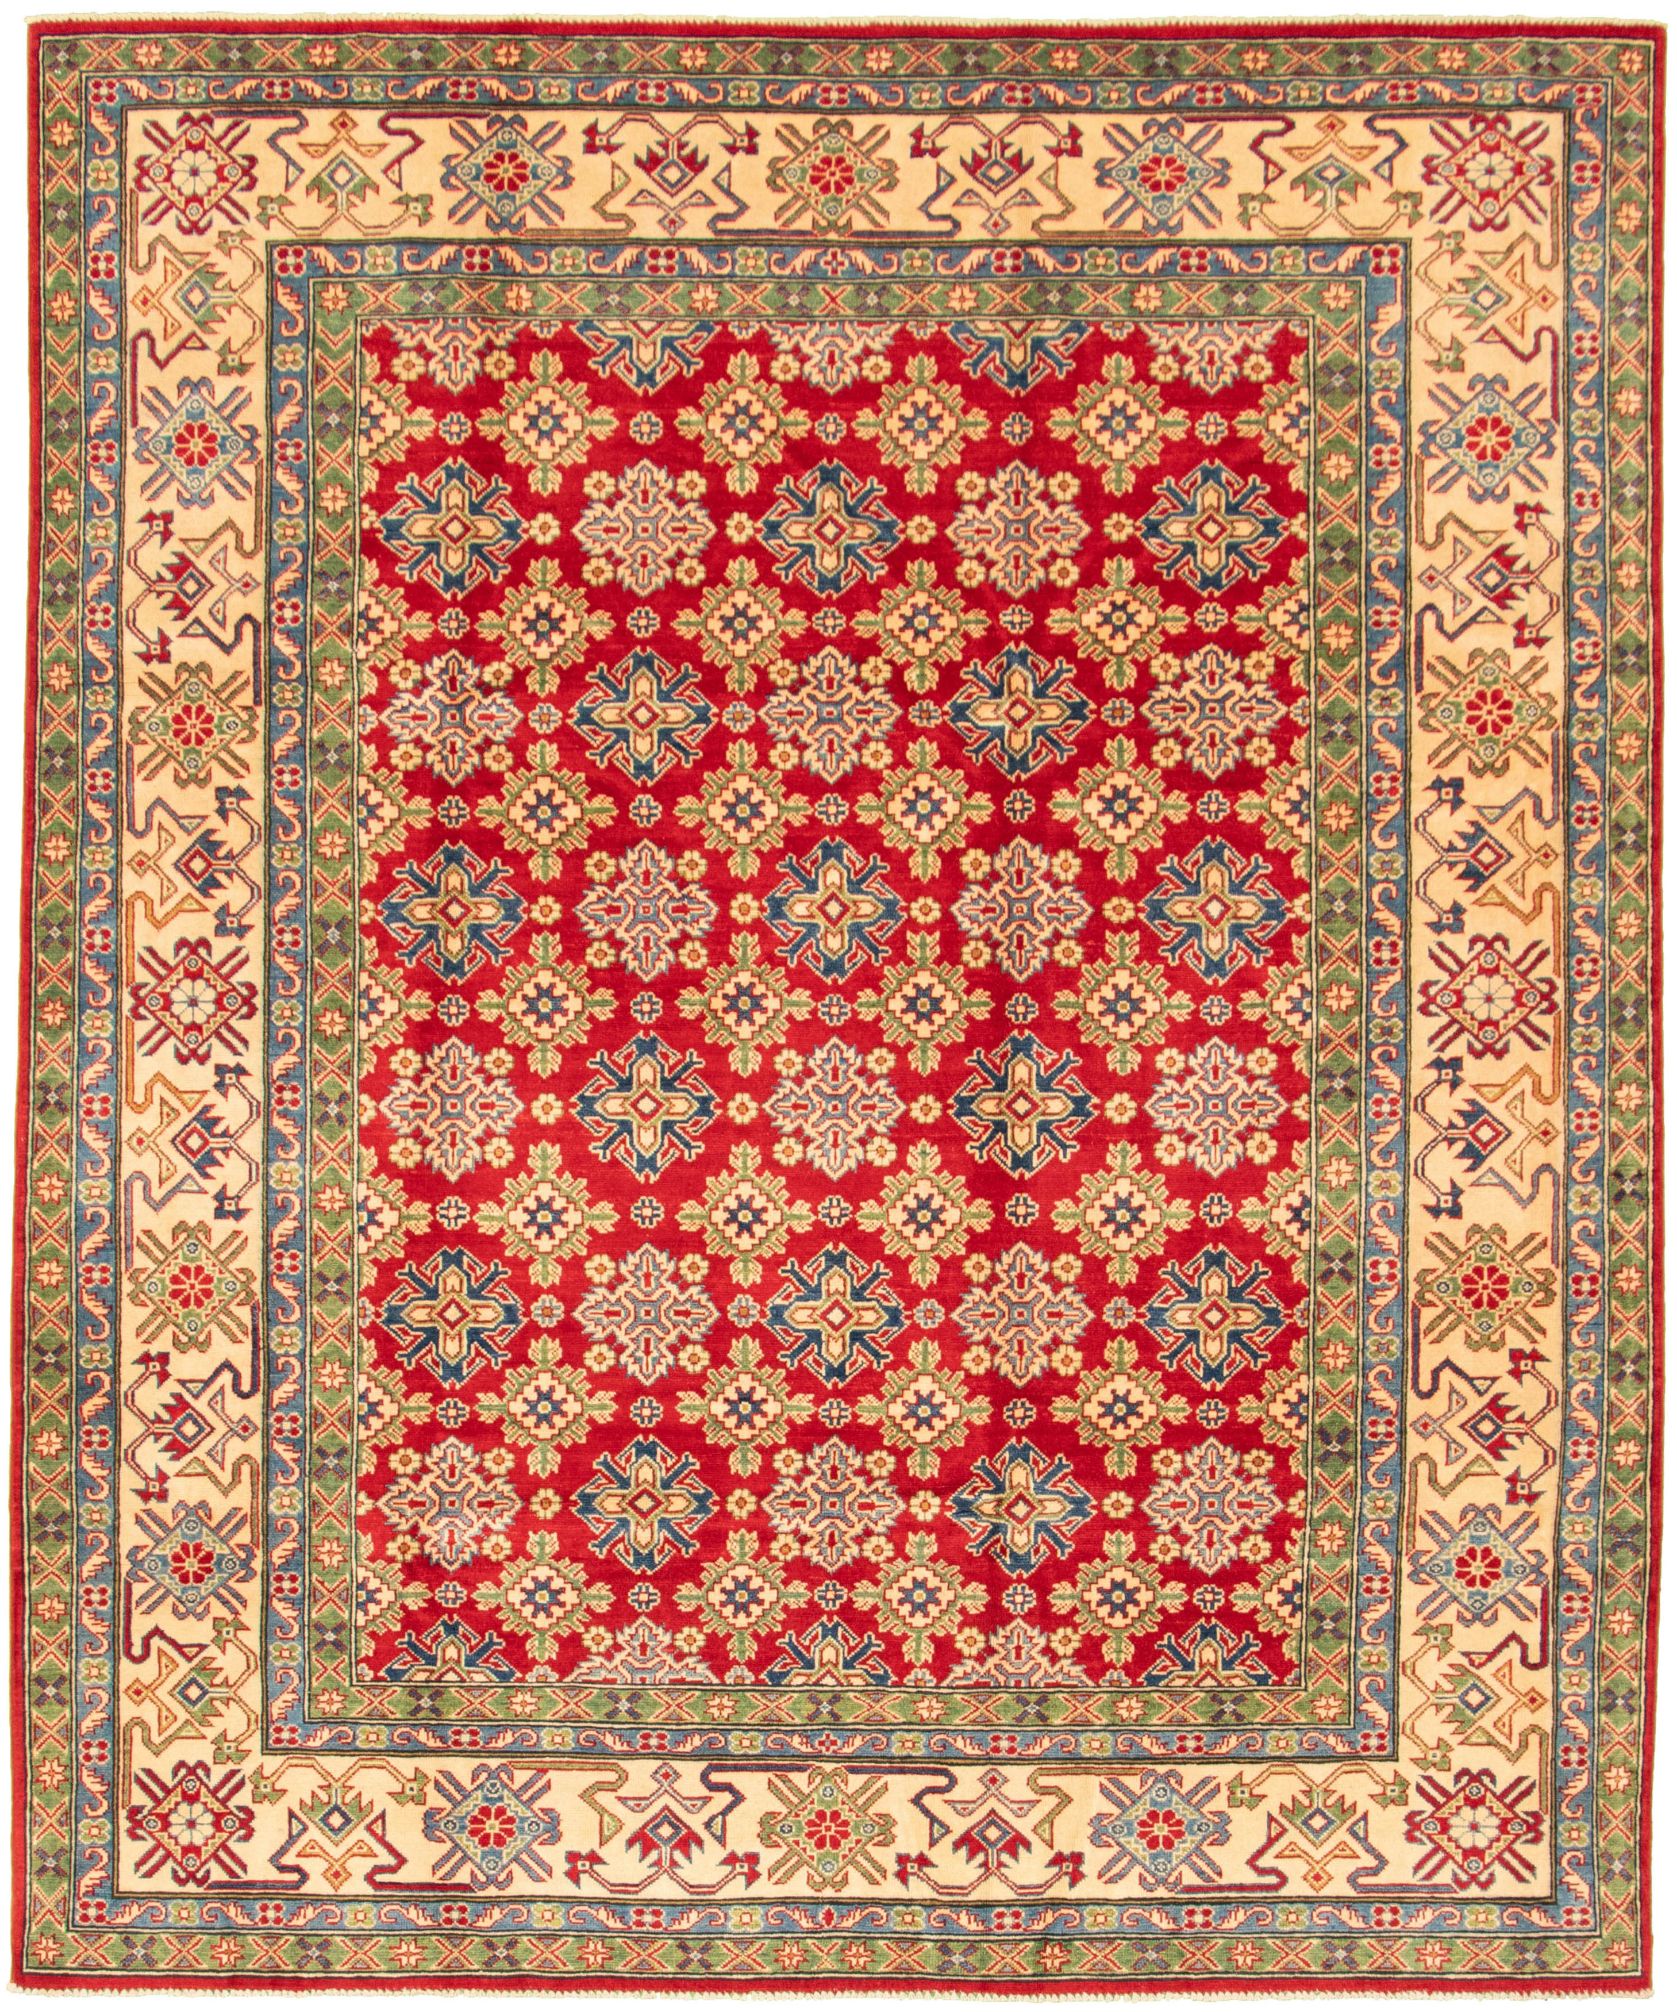 Hand-knotted Finest Gazni Red Wool Rug 8'1" x 9'10"  Size: 8'1" x 9'10"  